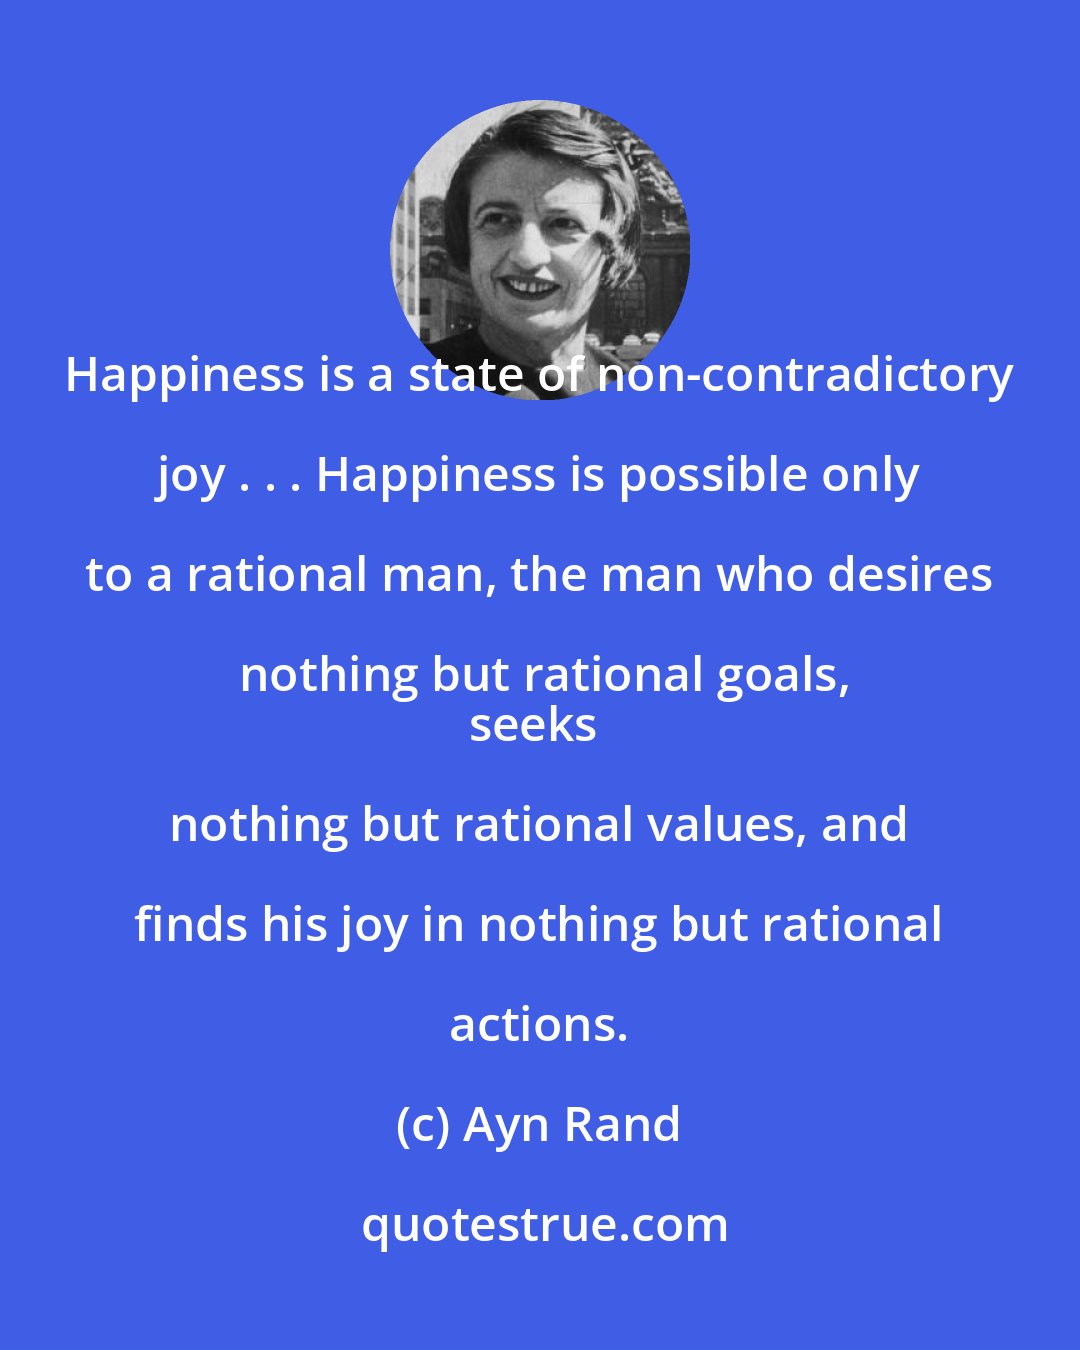 Ayn Rand: Happiness is a state of non-contradictory joy . . . Happiness is possible only to a rational man, the man who desires nothing but rational goals,
seeks nothing but rational values, and finds his joy in nothing but rational actions.